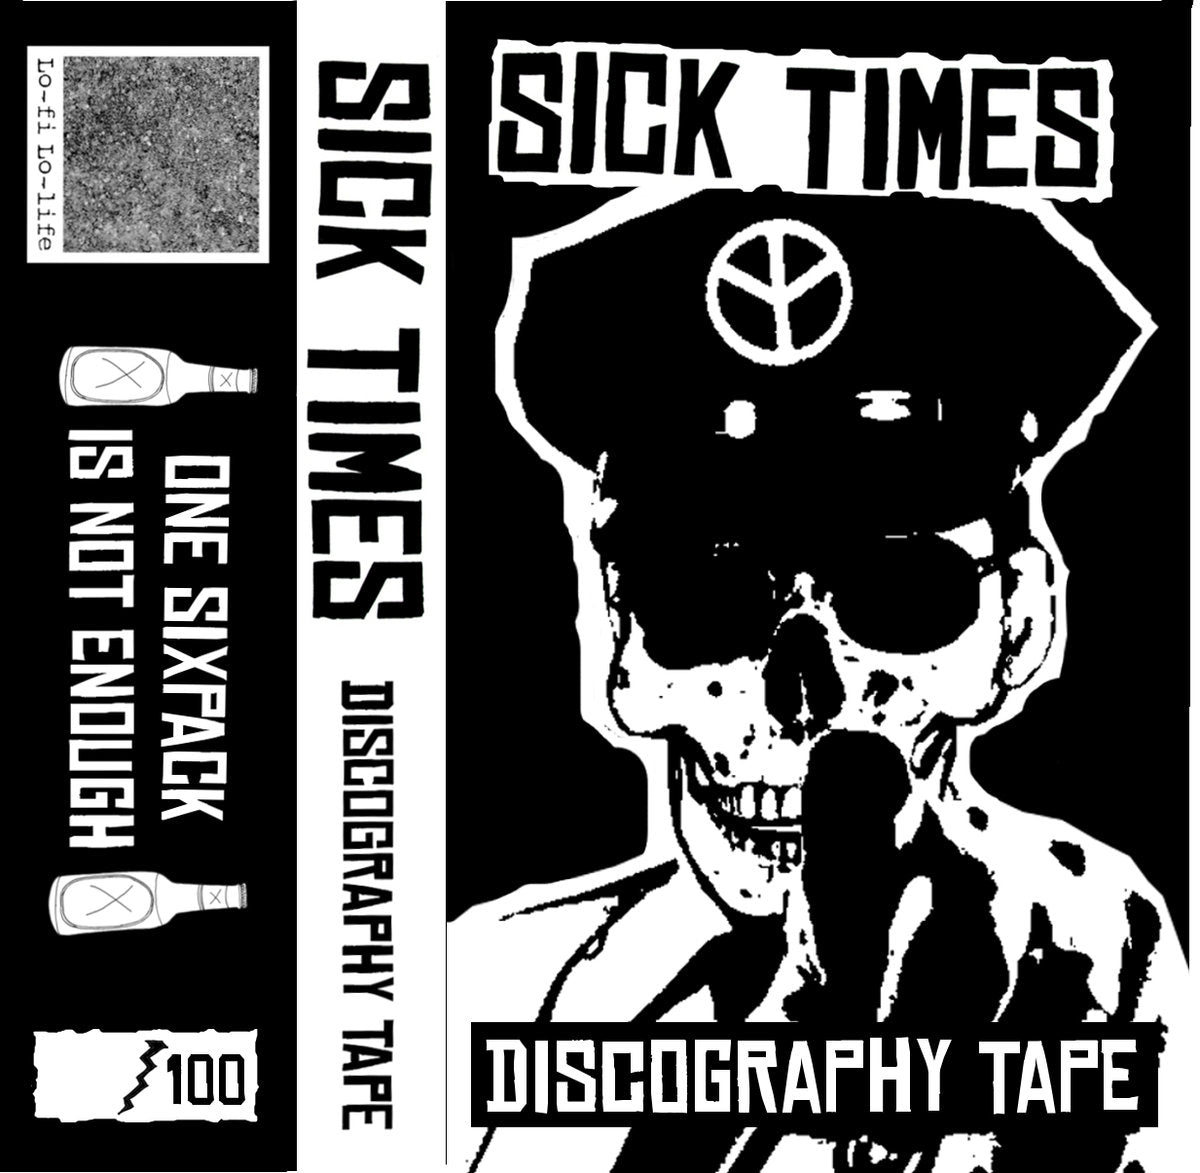 Sick Times- Discography Tape CS ~100 HAND NUMBERED!